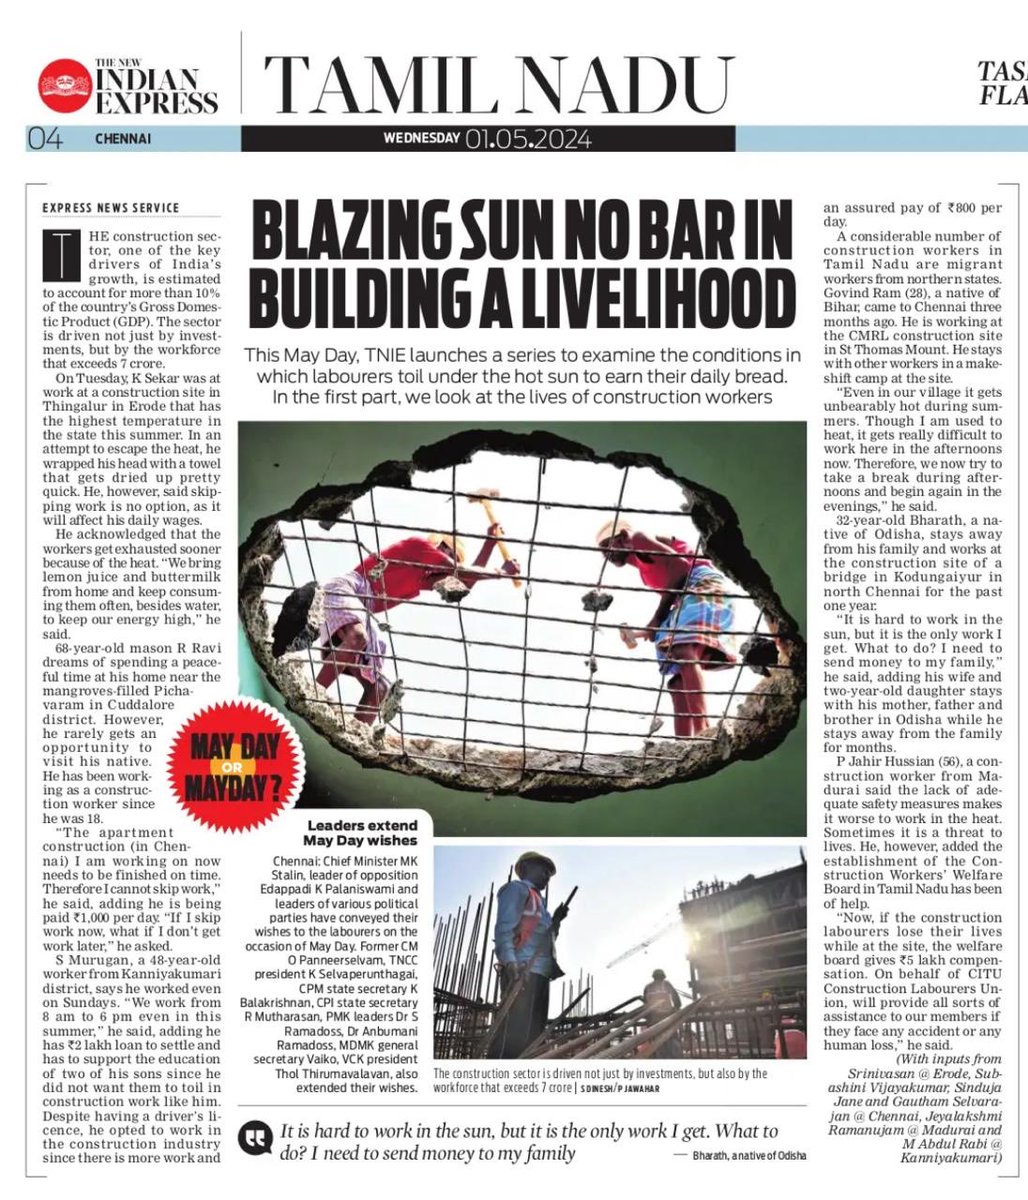 On #MayDay today, TNIE launches a series —May Day or Mayday? -to take a close look at workers who toil under blazing sun to earn their daily bread. In the 1st part, we look at the lives of construction workers ⁦@NewIndianXpress⁩ ⁦@xpresstn⁩ newindianexpress.com/states/tamil-n…